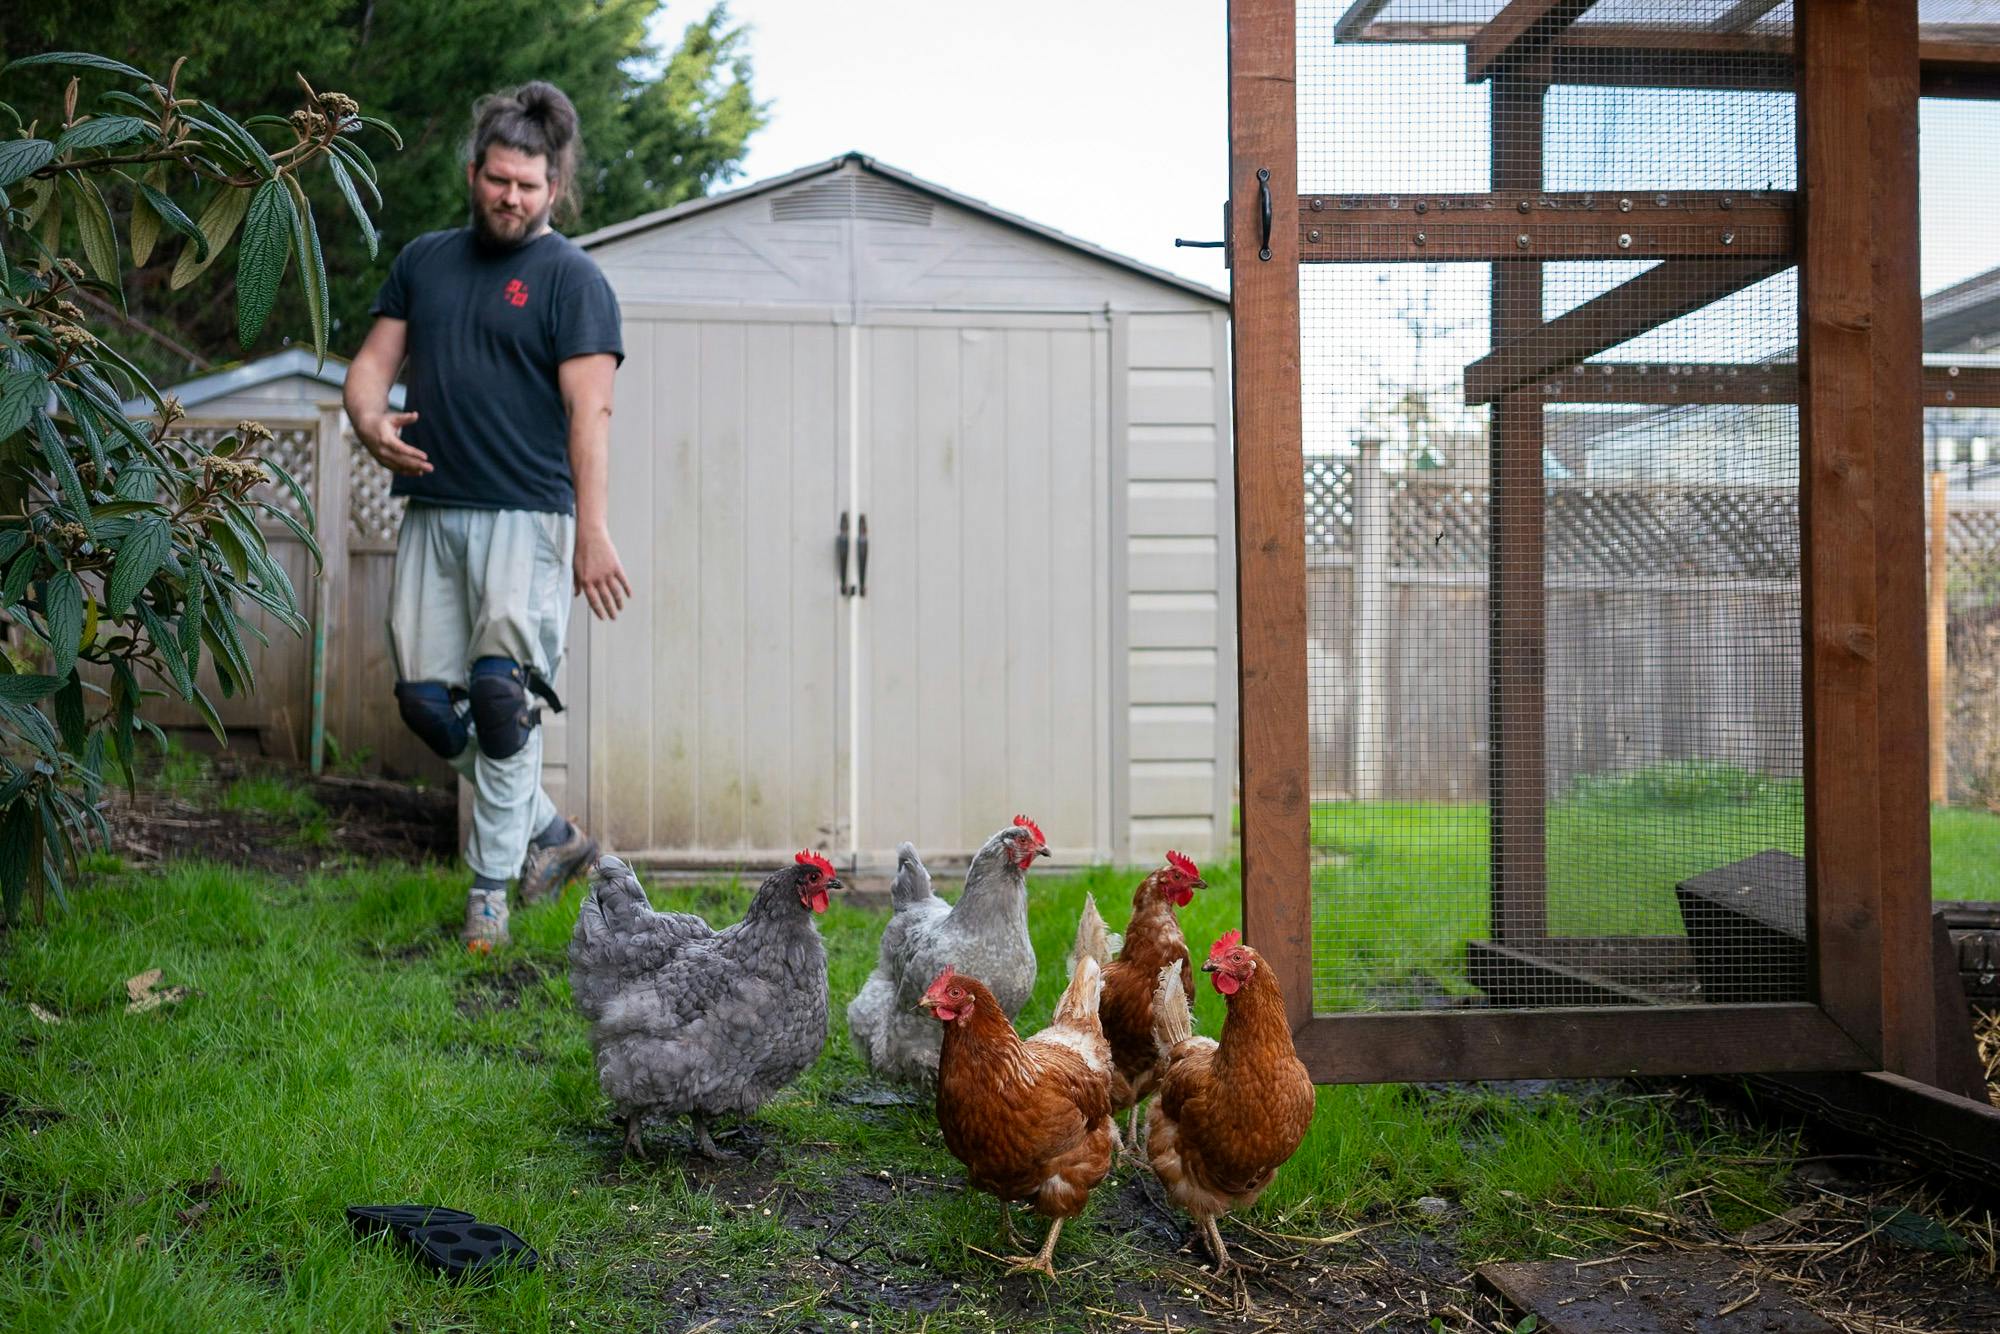 Mattie in his yard with his chickens.